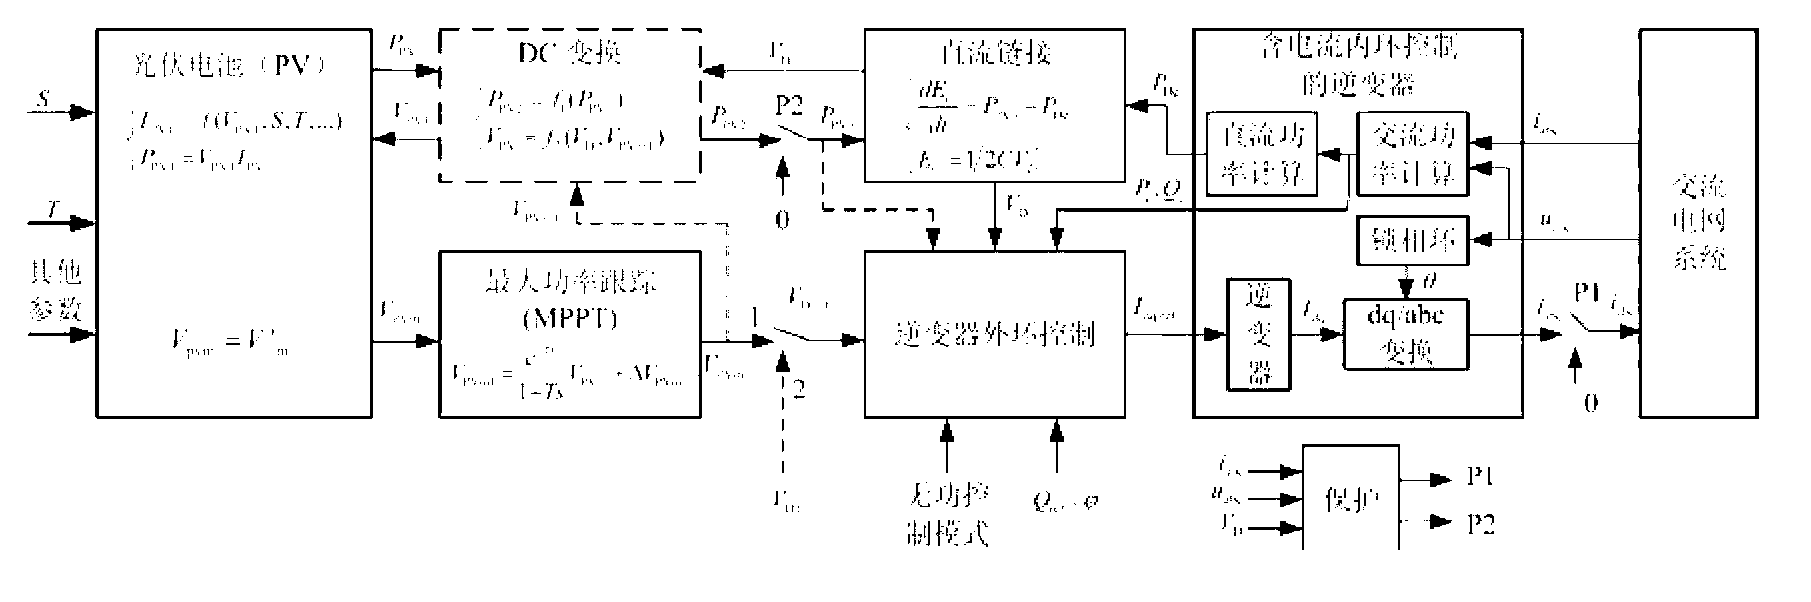 Universal electromechanical transient state model of grid-connected photovoltaic power generation system